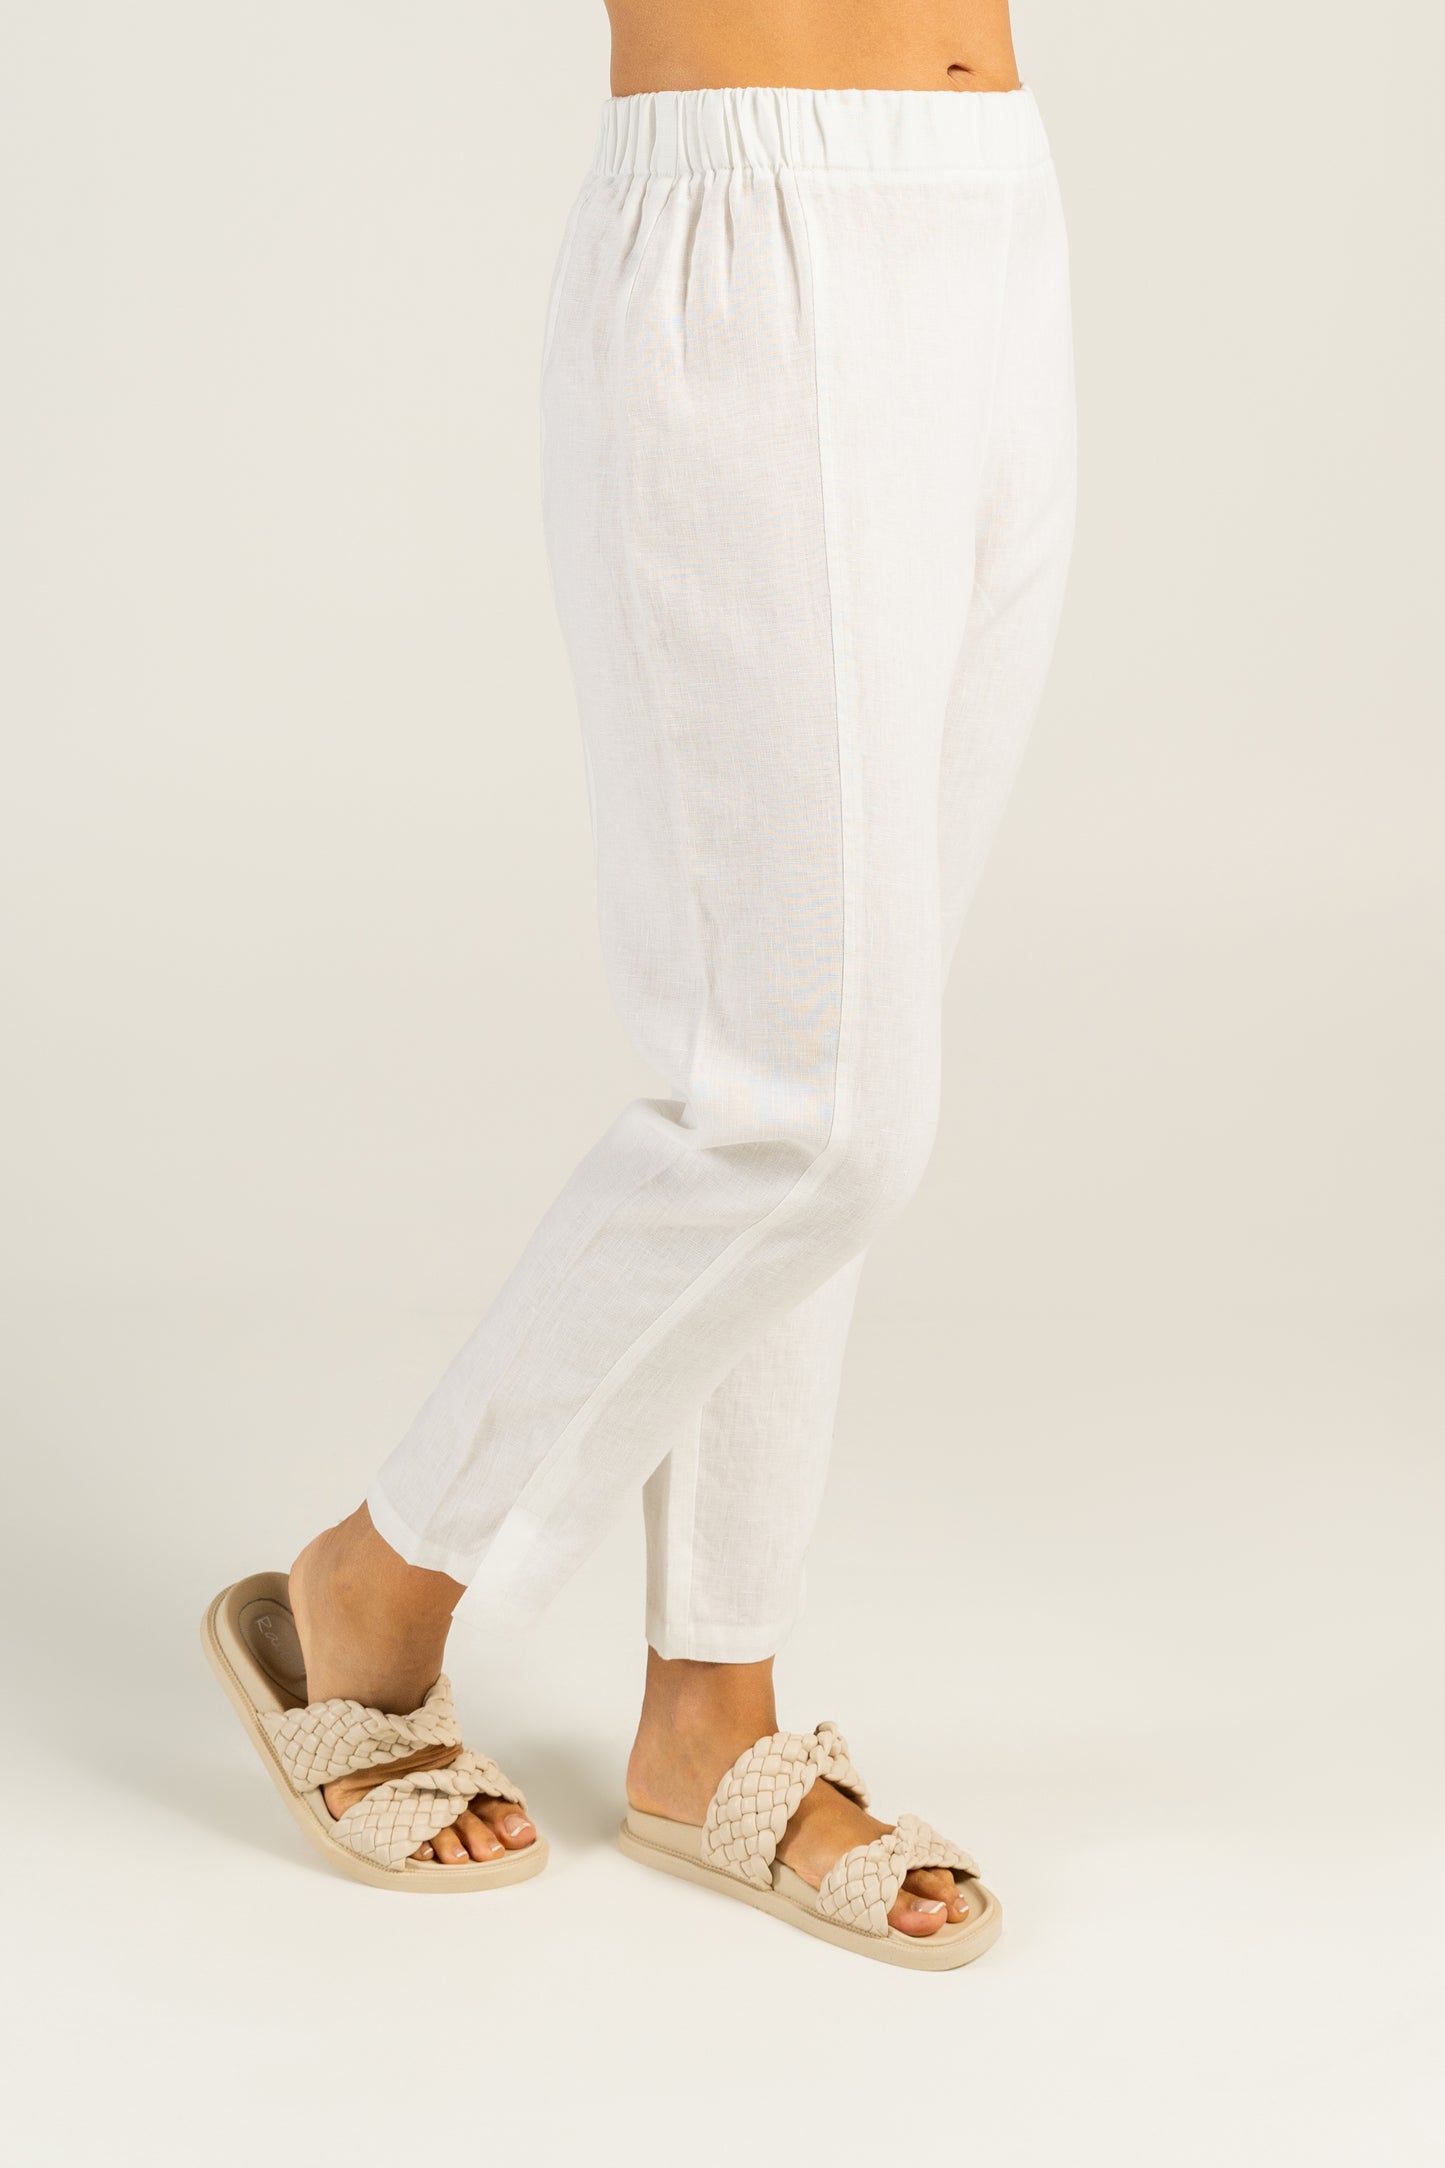 See Saw - 100% Linen 7/8 Seam Detail Pant with Split White | SW774W